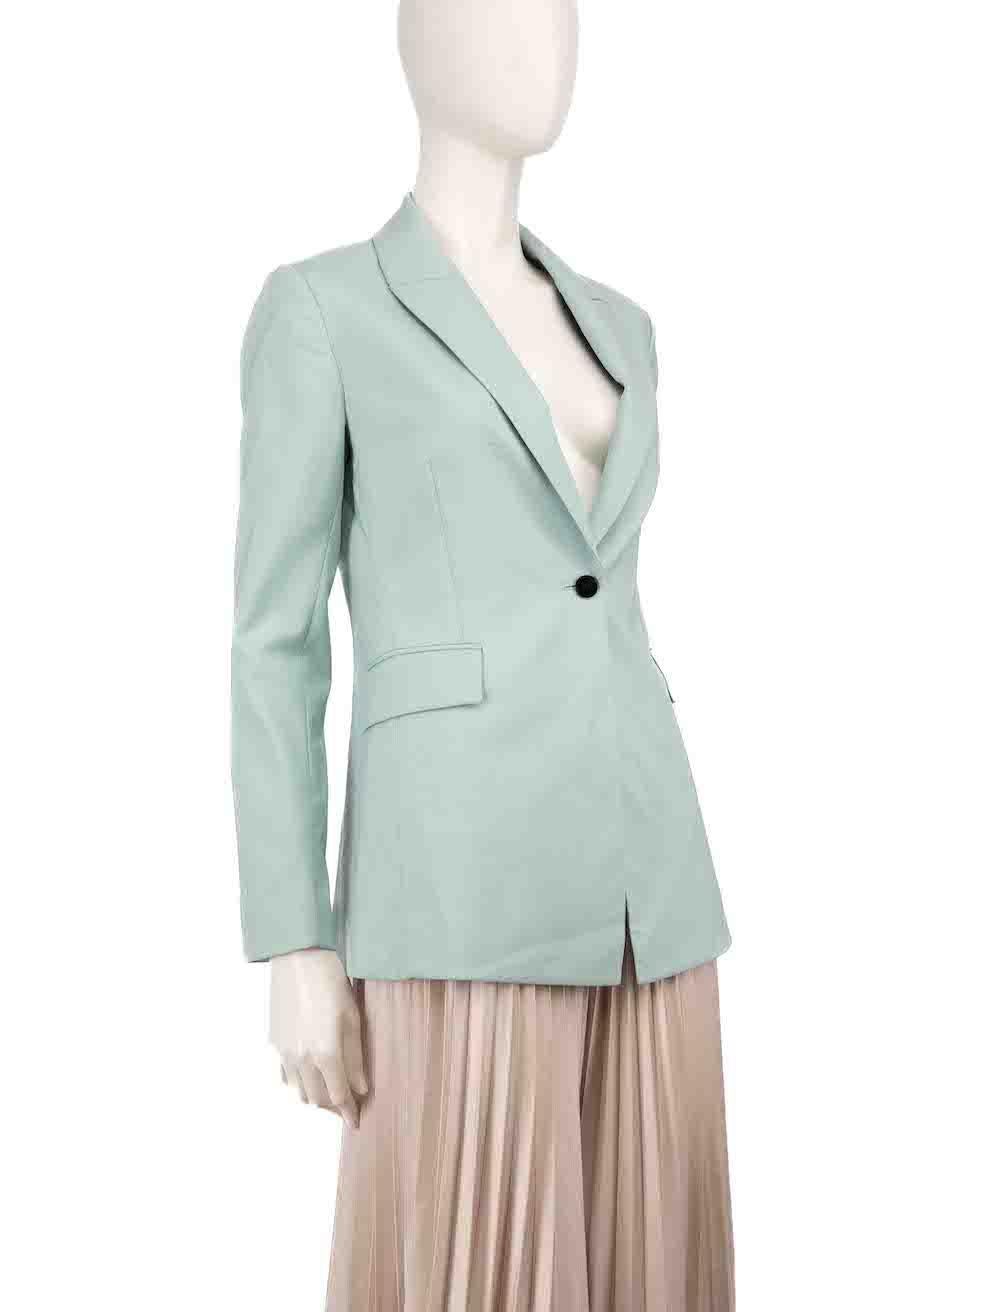 CONDITION is Very good. Hardly any visible wear to jacket is evident on this used Theory designer resale item.
 
 
 
 Details
 
 
 Light turquoise
 
 Wool
 
 Blazer
 
 Long sleeves
 
 Button fastening
 
 2x Side pockets
 
 
 
 
 
 Made in Vietnam
 
